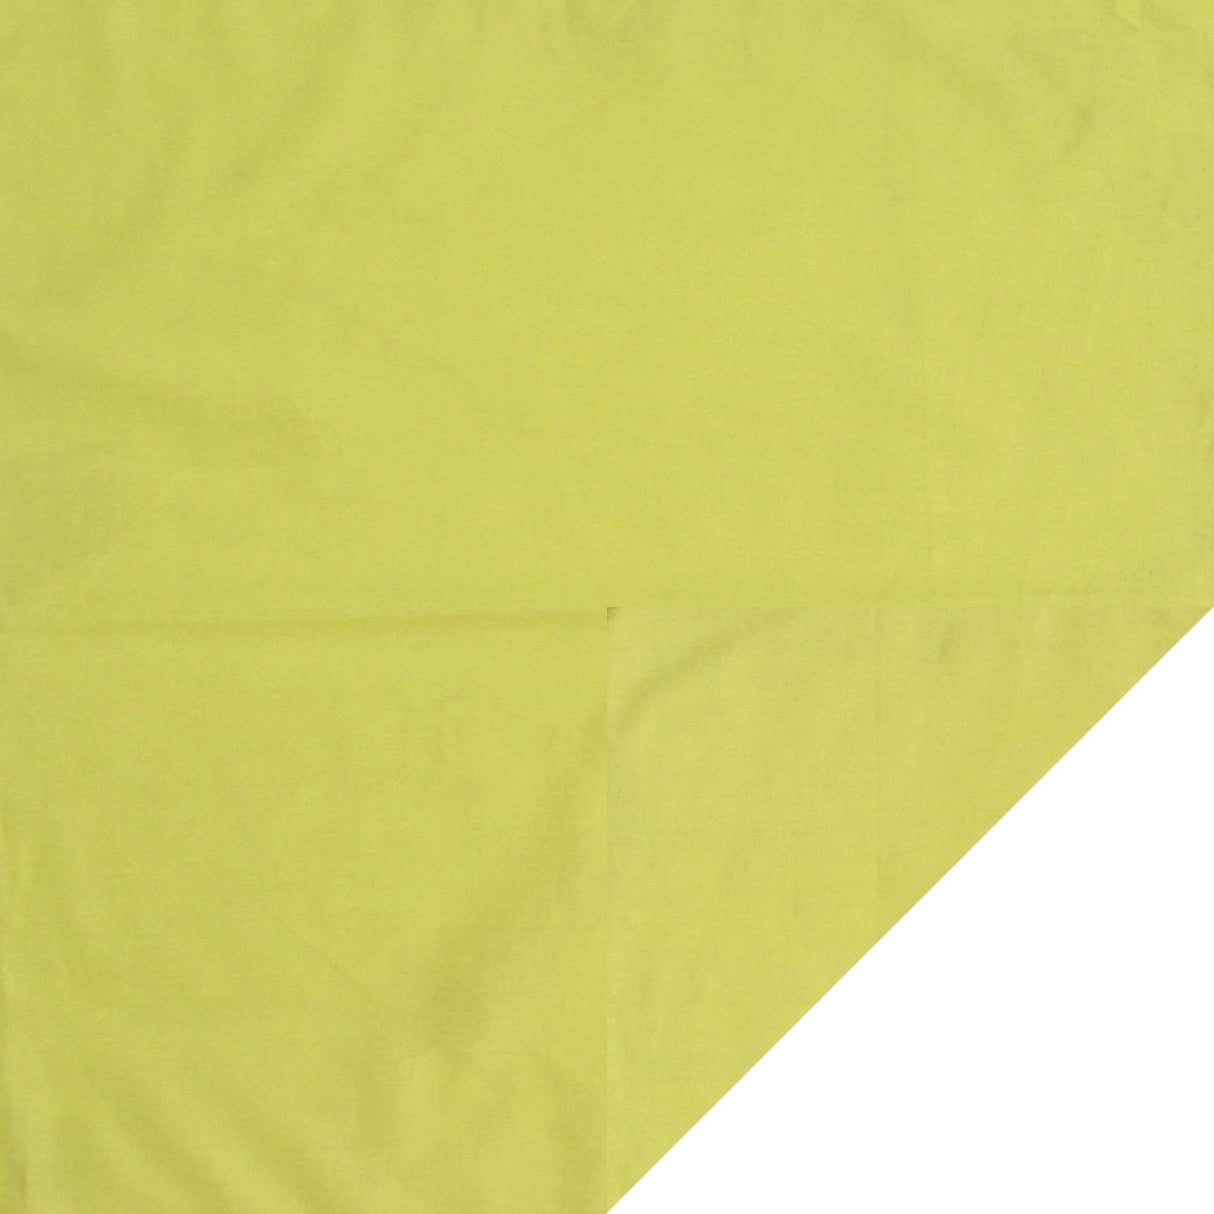 Polyester Solid Color Economical Bandana